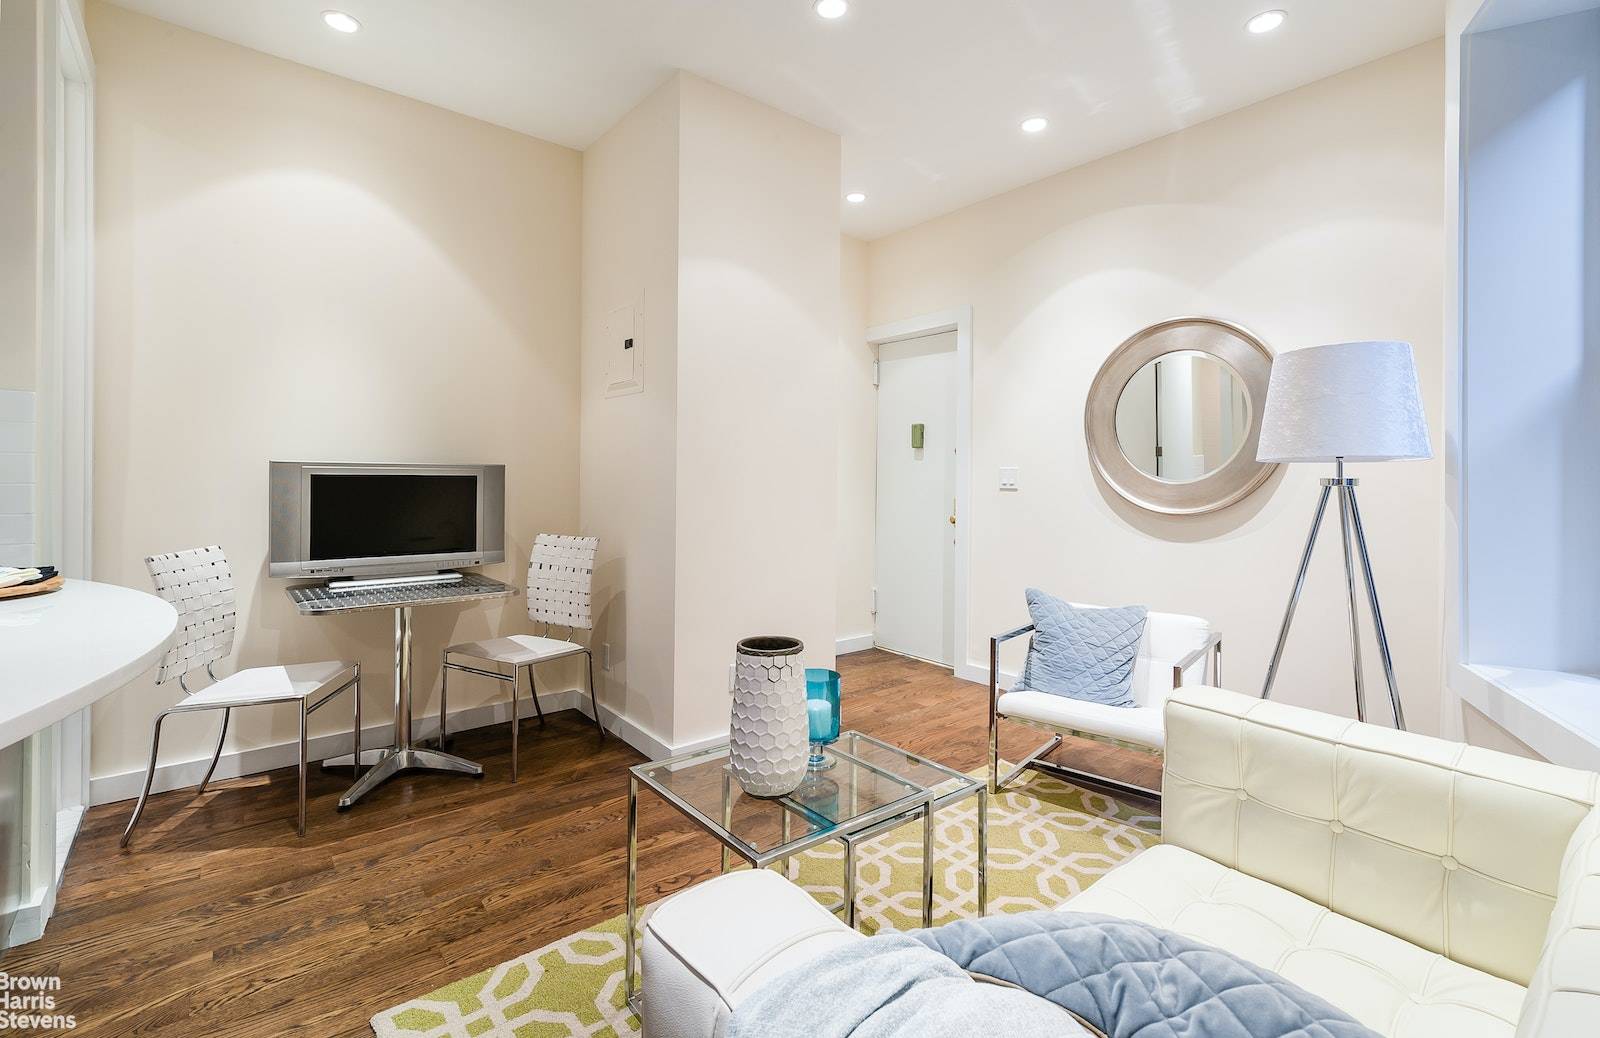 Nestled on a beautiful tree lined Soho street, this 2br gem in a classic prewar apartment building is surrounded by wonderful shops, bars amp ; restaurants, and is pin drop ...